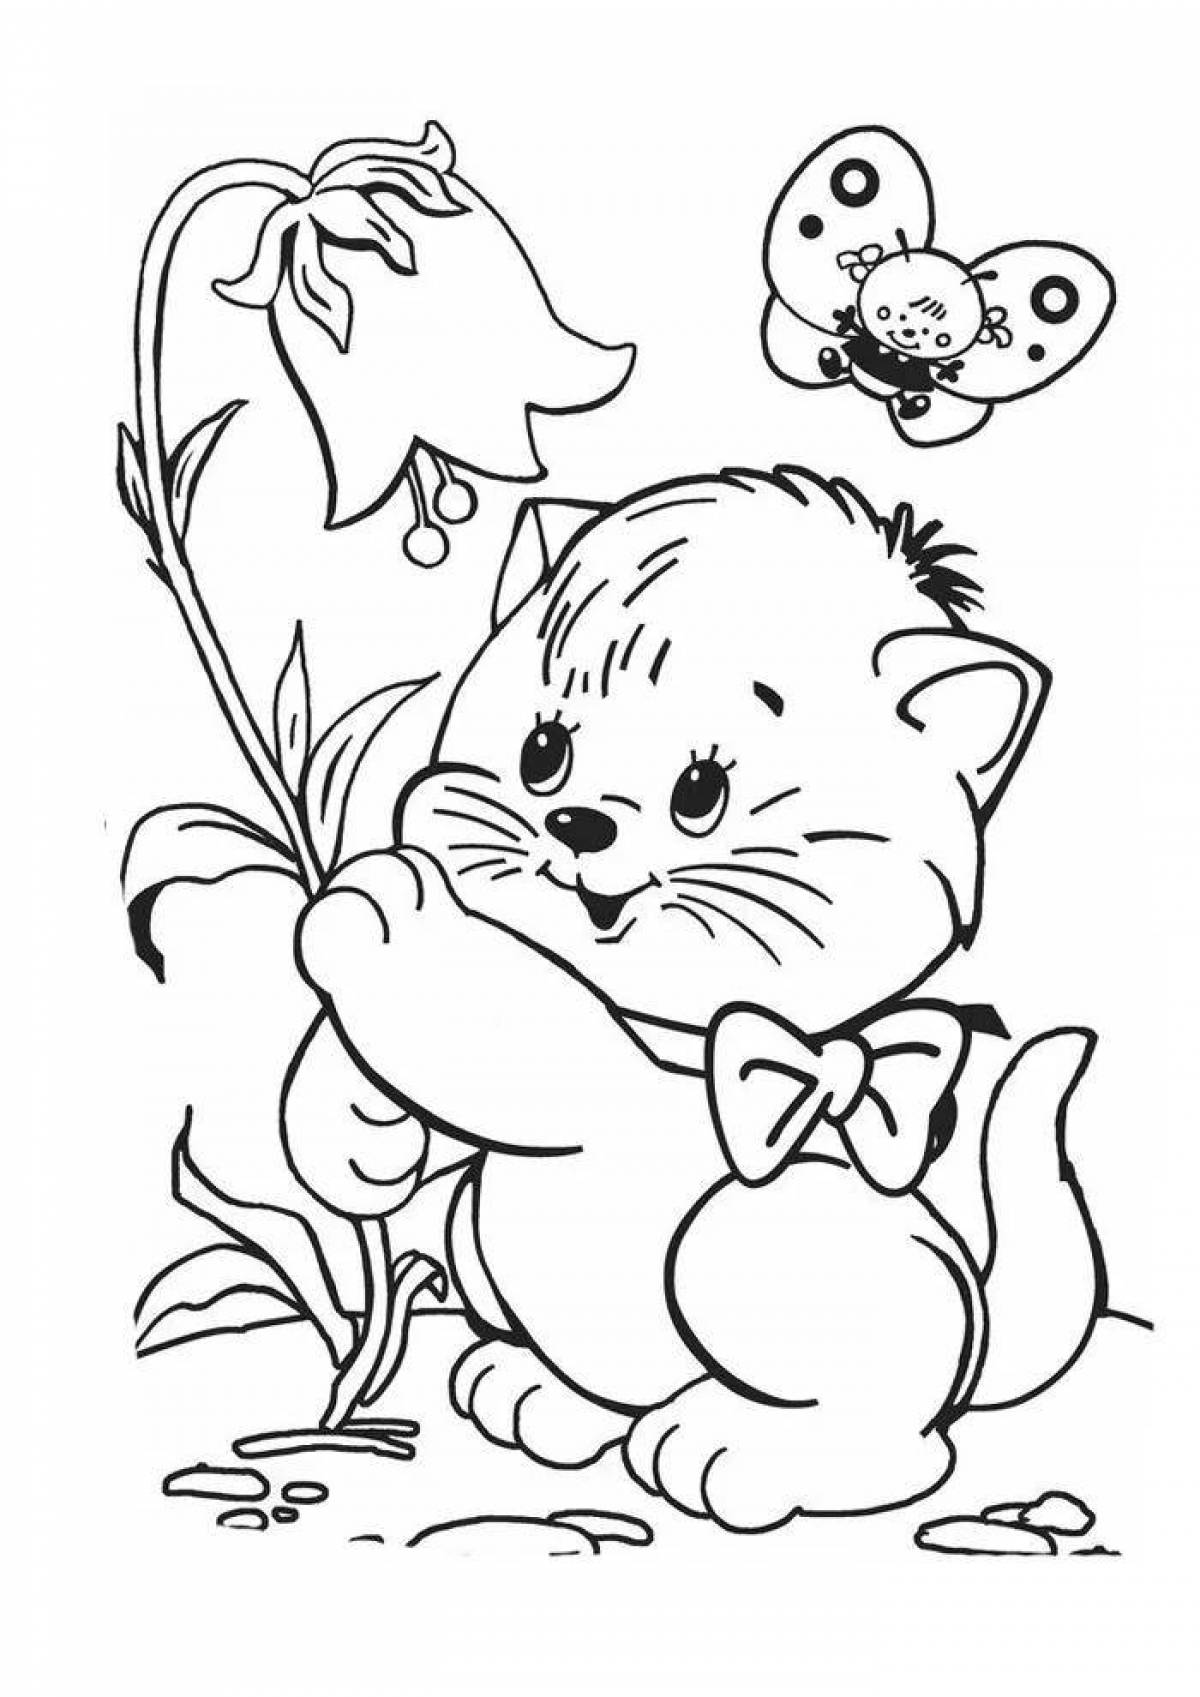 Fairytale coloring book for children 6-7 years old cats